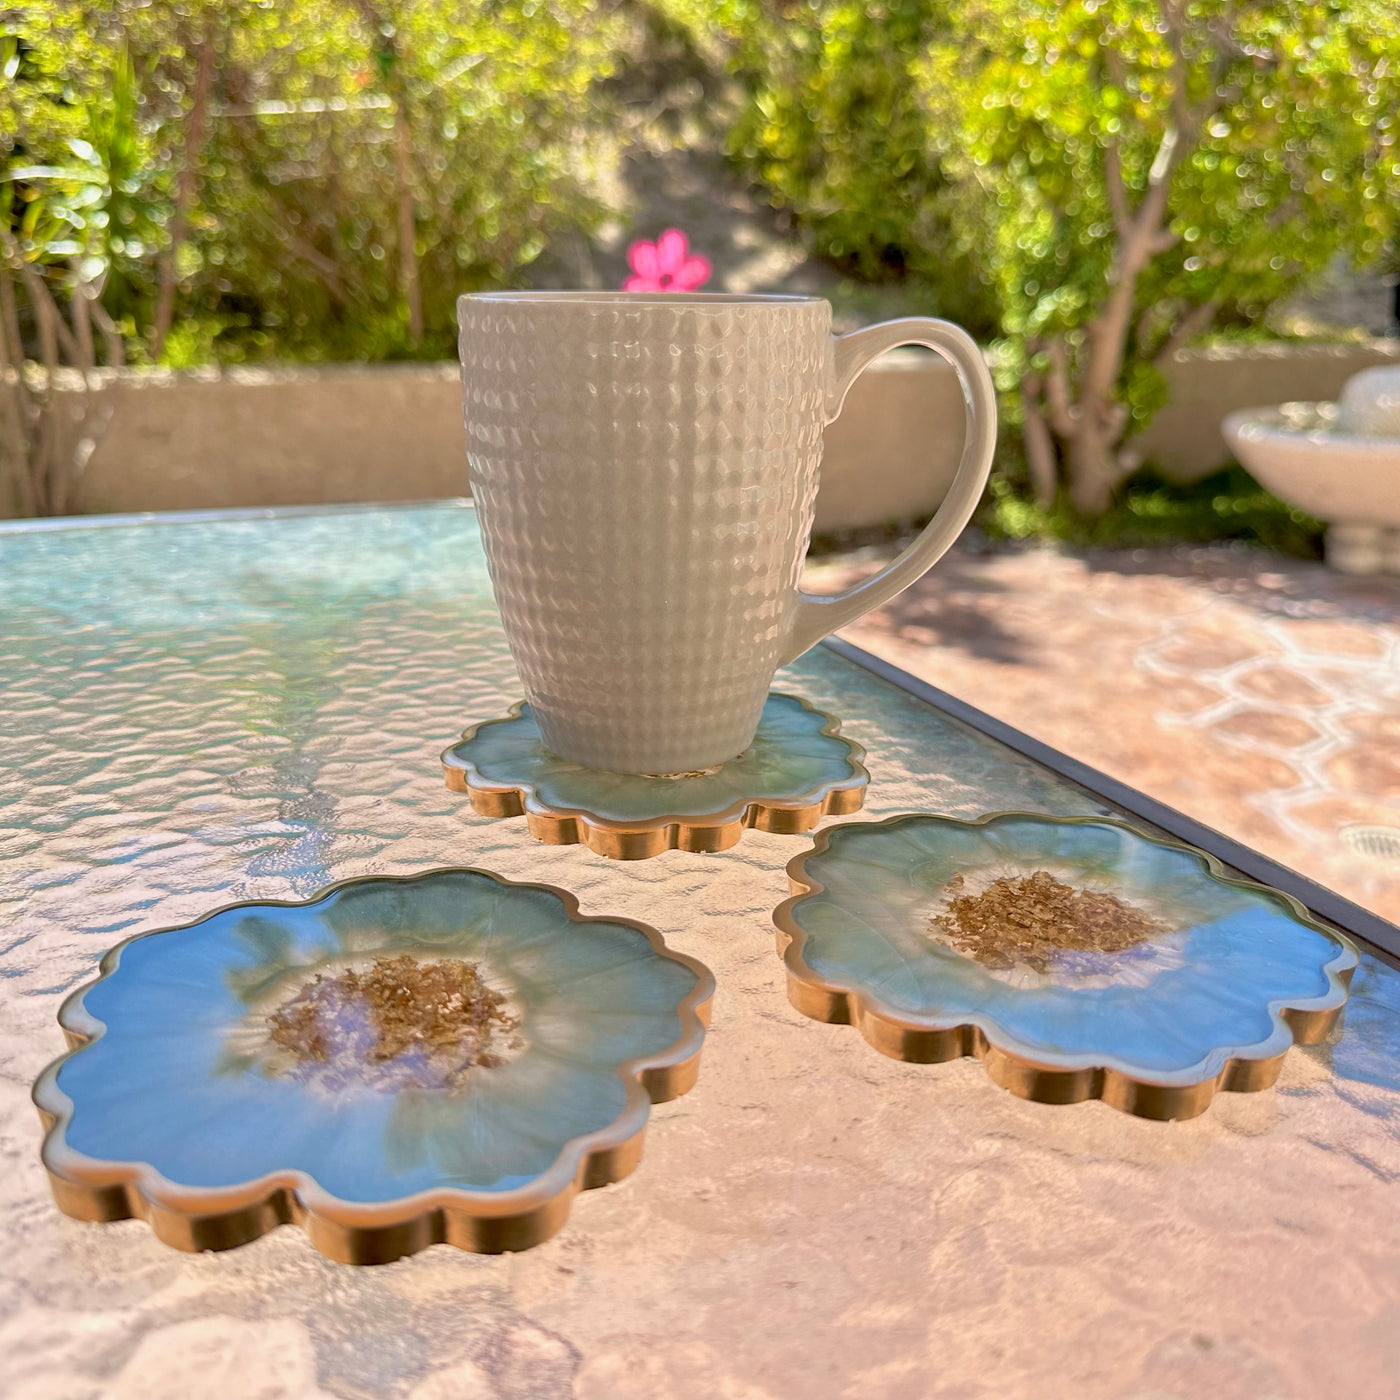 Handmade Sage Mint Green and Gold Flower Shaped Coasters - Jasmin Renee Art - Three Coasters with Cup Outside